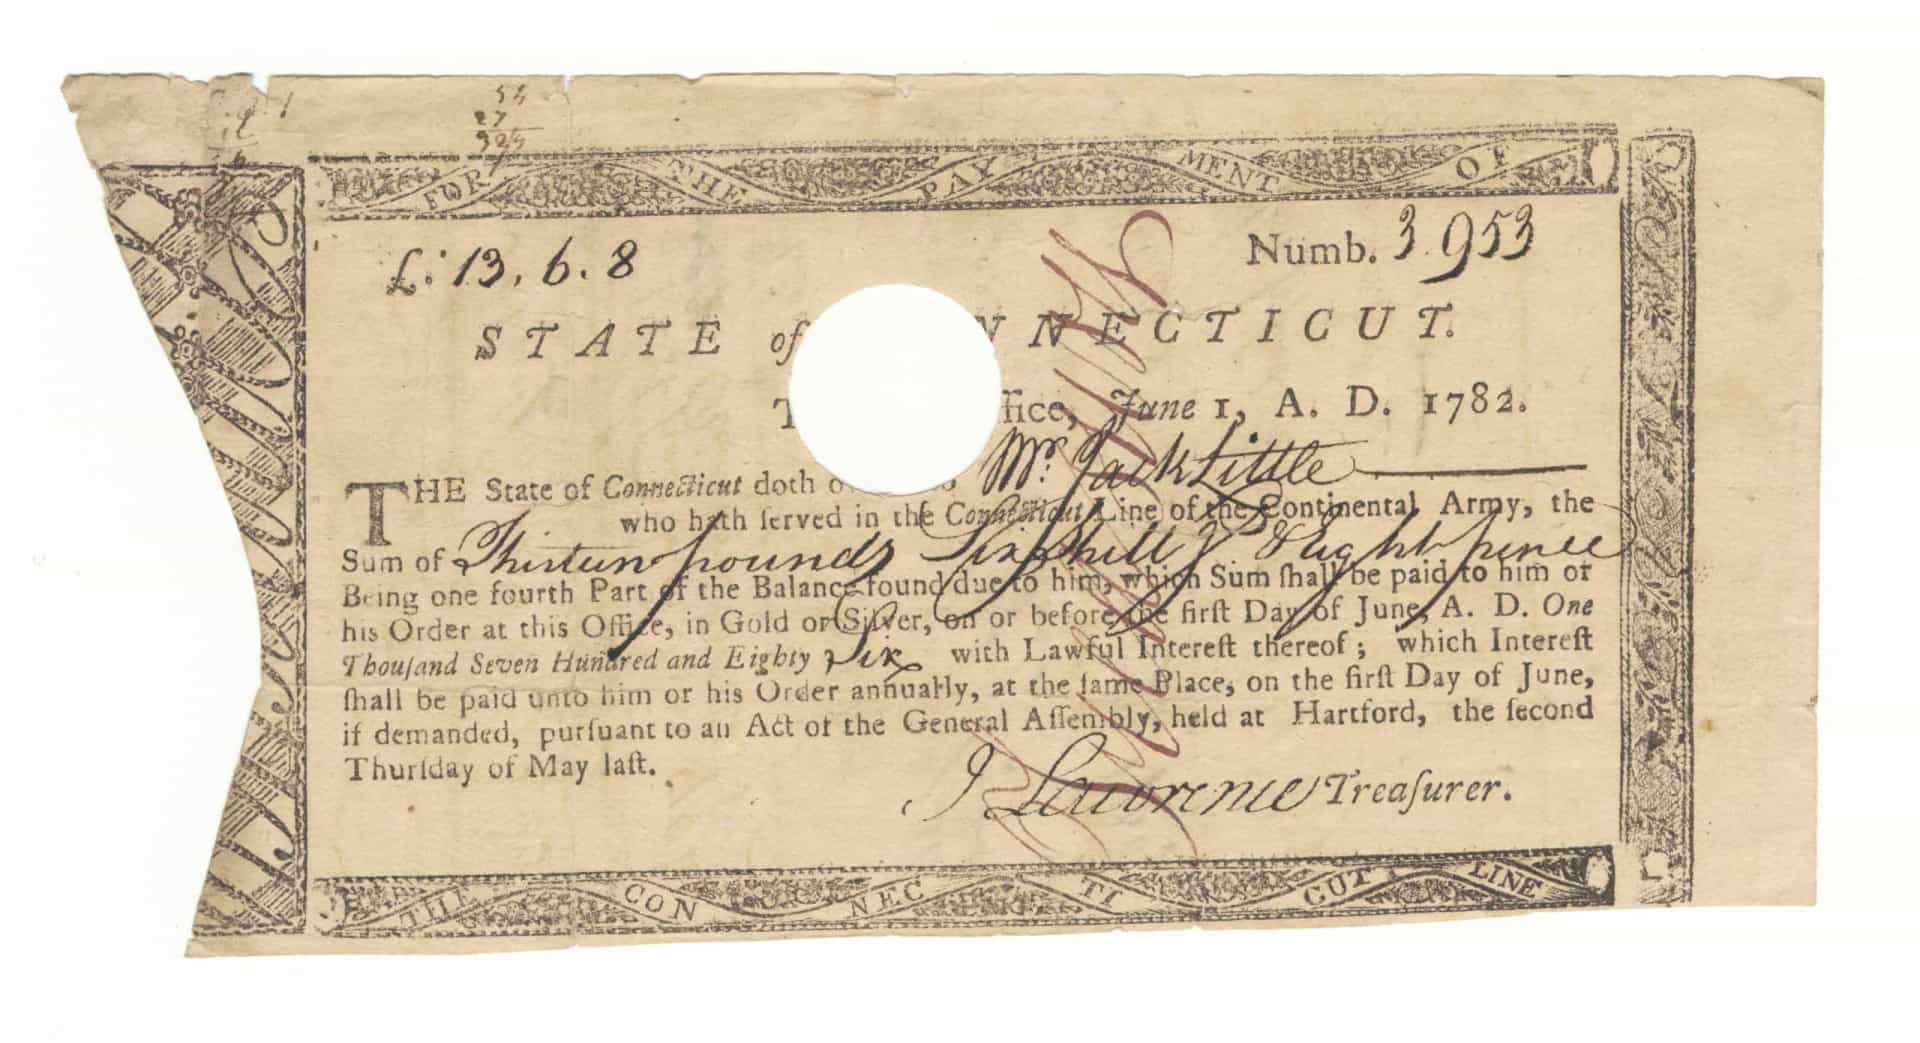 <p>Housed in Hartford's Supreme Court and Connecticut State Library building, this museum is where to catch up on exhibits that trace the growth of the state and its role in the development of the nation. Pictured is a Revolutionary War payment receipt owned by Jack Little, a soldier from the 2nd Company, 4th Regiment of the Connecticut Line, in the Continental Army.</p><p><a href="https://www.msn.com/en-us/community/channel/vid-7xx8mnucu55yw63we9va2gwr7uihbxwc68fxqp25x6tg4ftibpra?cvid=94631541bc0f4f89bfd59158d696ad7e">Follow us and access great exclusive content everyday</a></p>